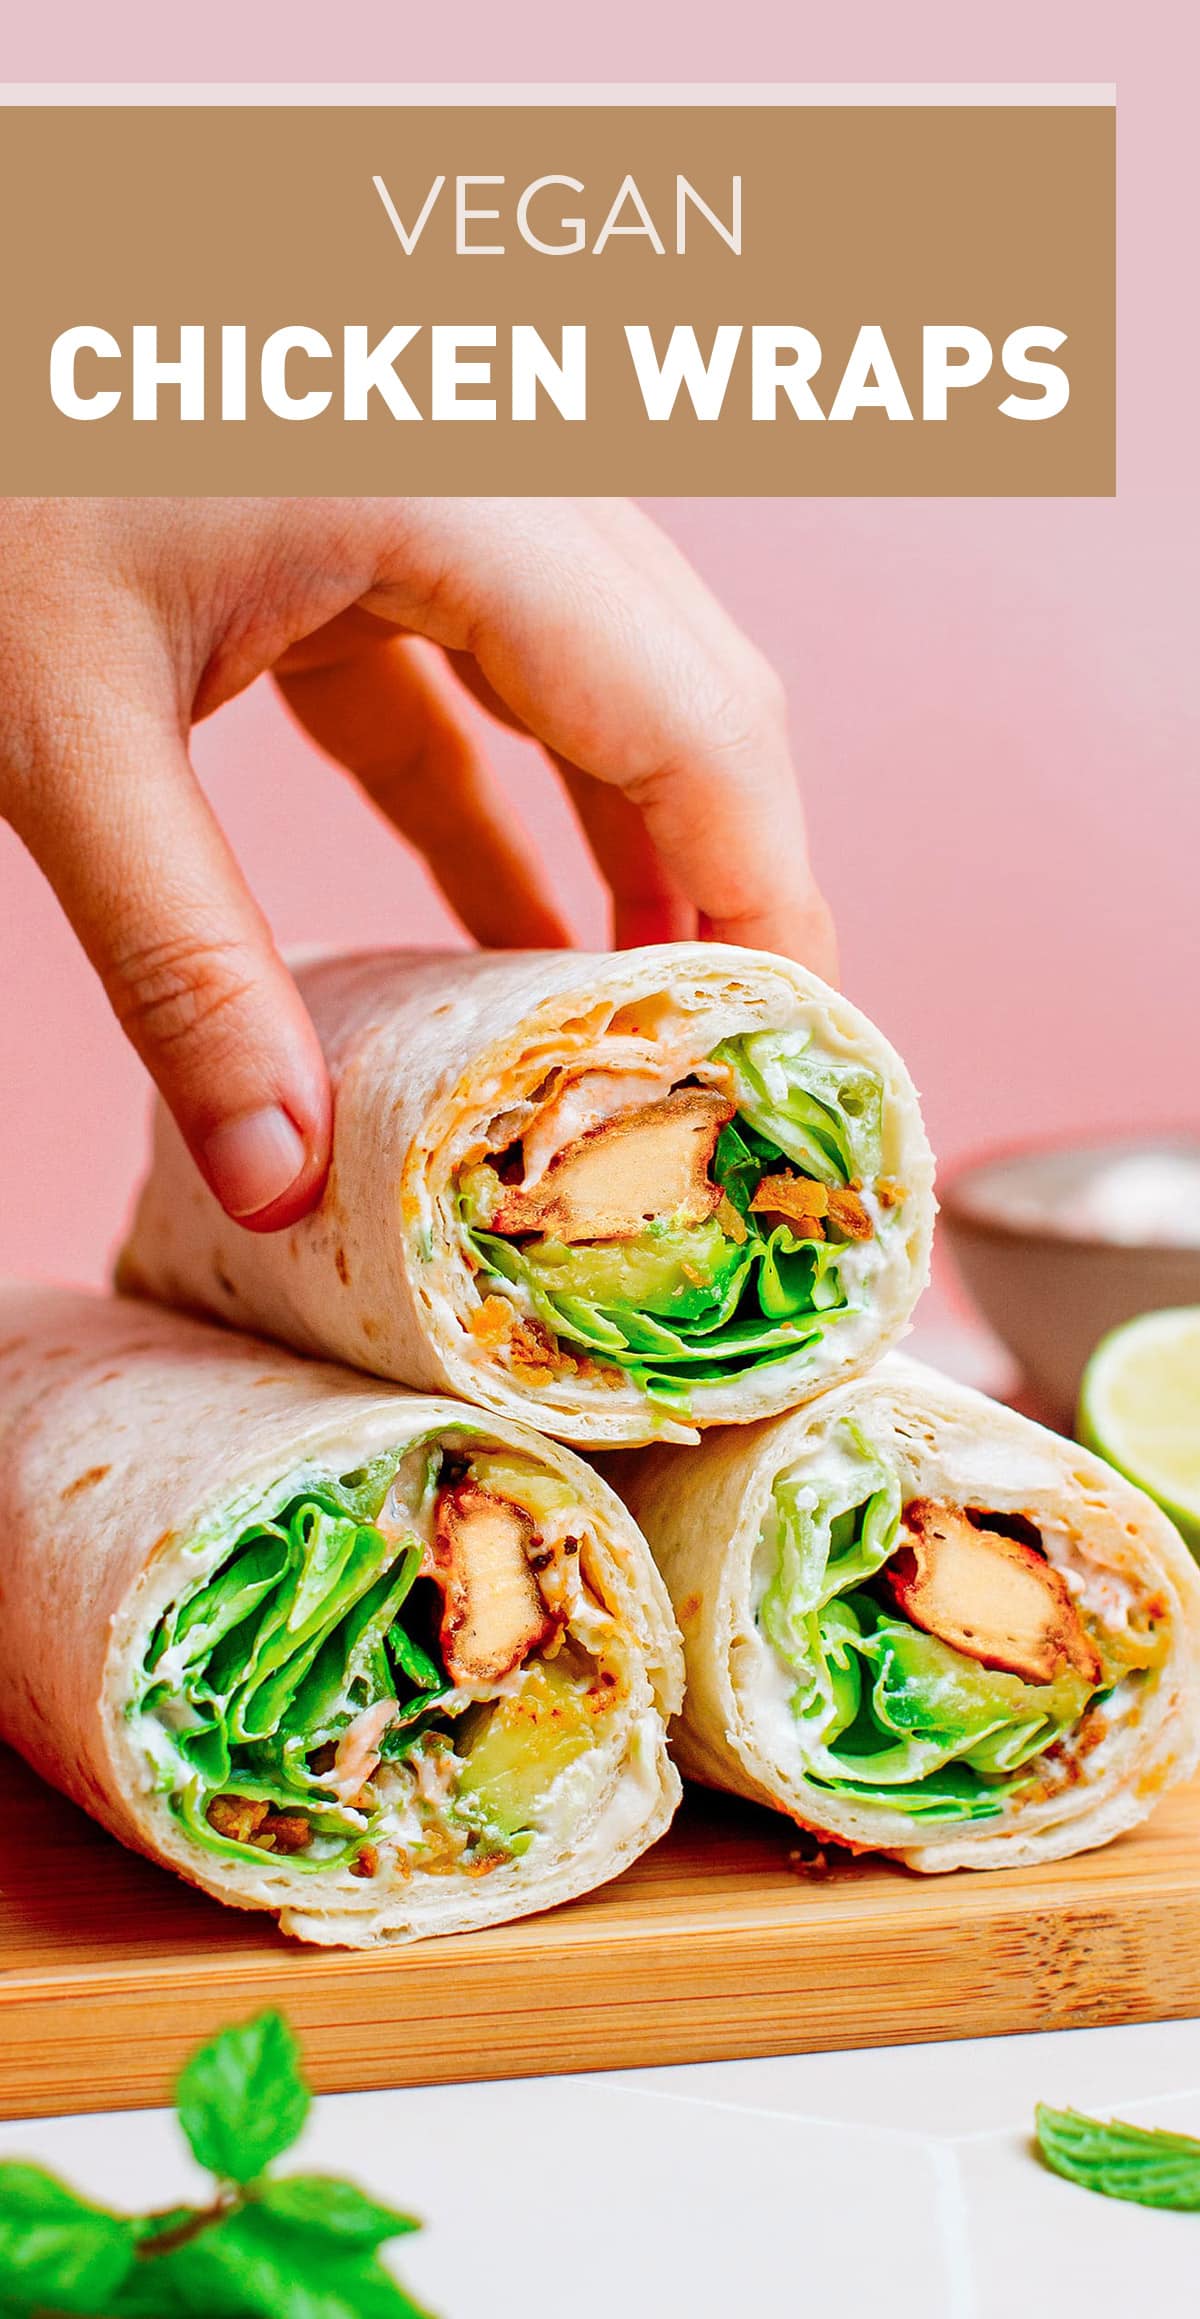 Loaded with crispy vegan chicken, garlicky cream cheese, avocado, fried onions, and crisp lettuce, these vegan chicken wraps are a must-try. Each bite is an explosion of flavor! Ideal for a quick on-the-go lunch or as a simple dinner. #vegan #wraps